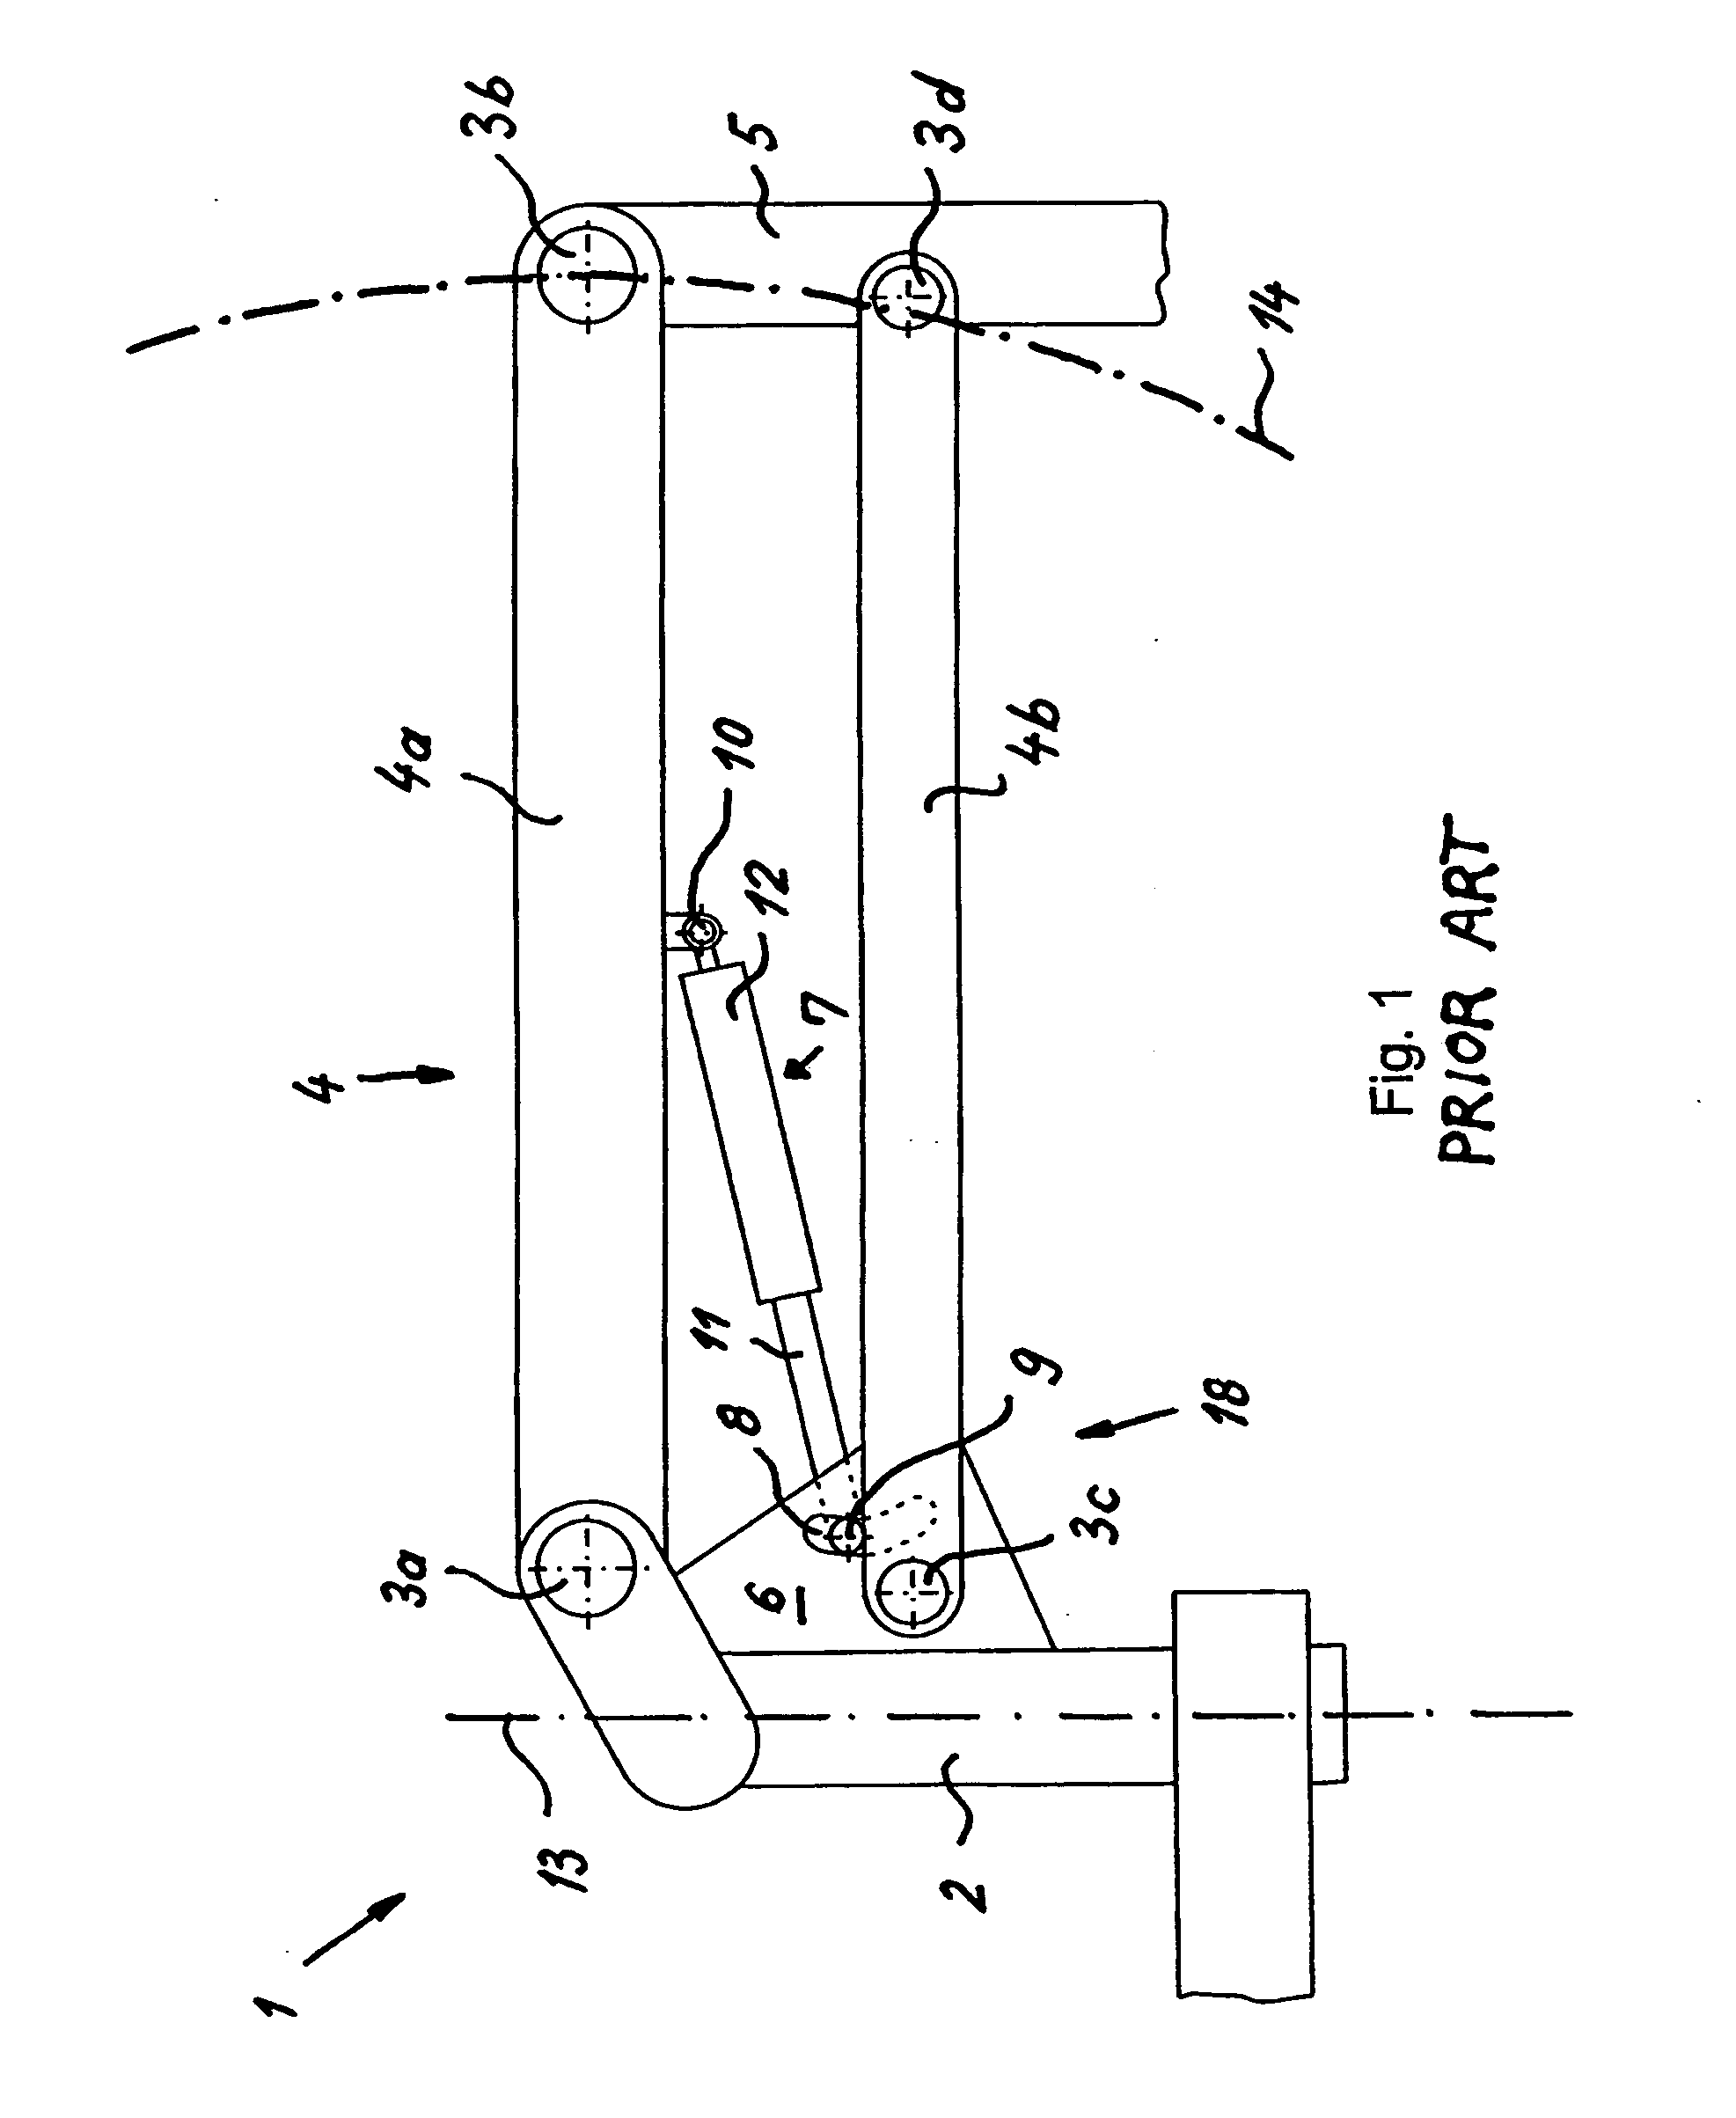 Stand, in particular for surgical microscopes, having an energy storage element